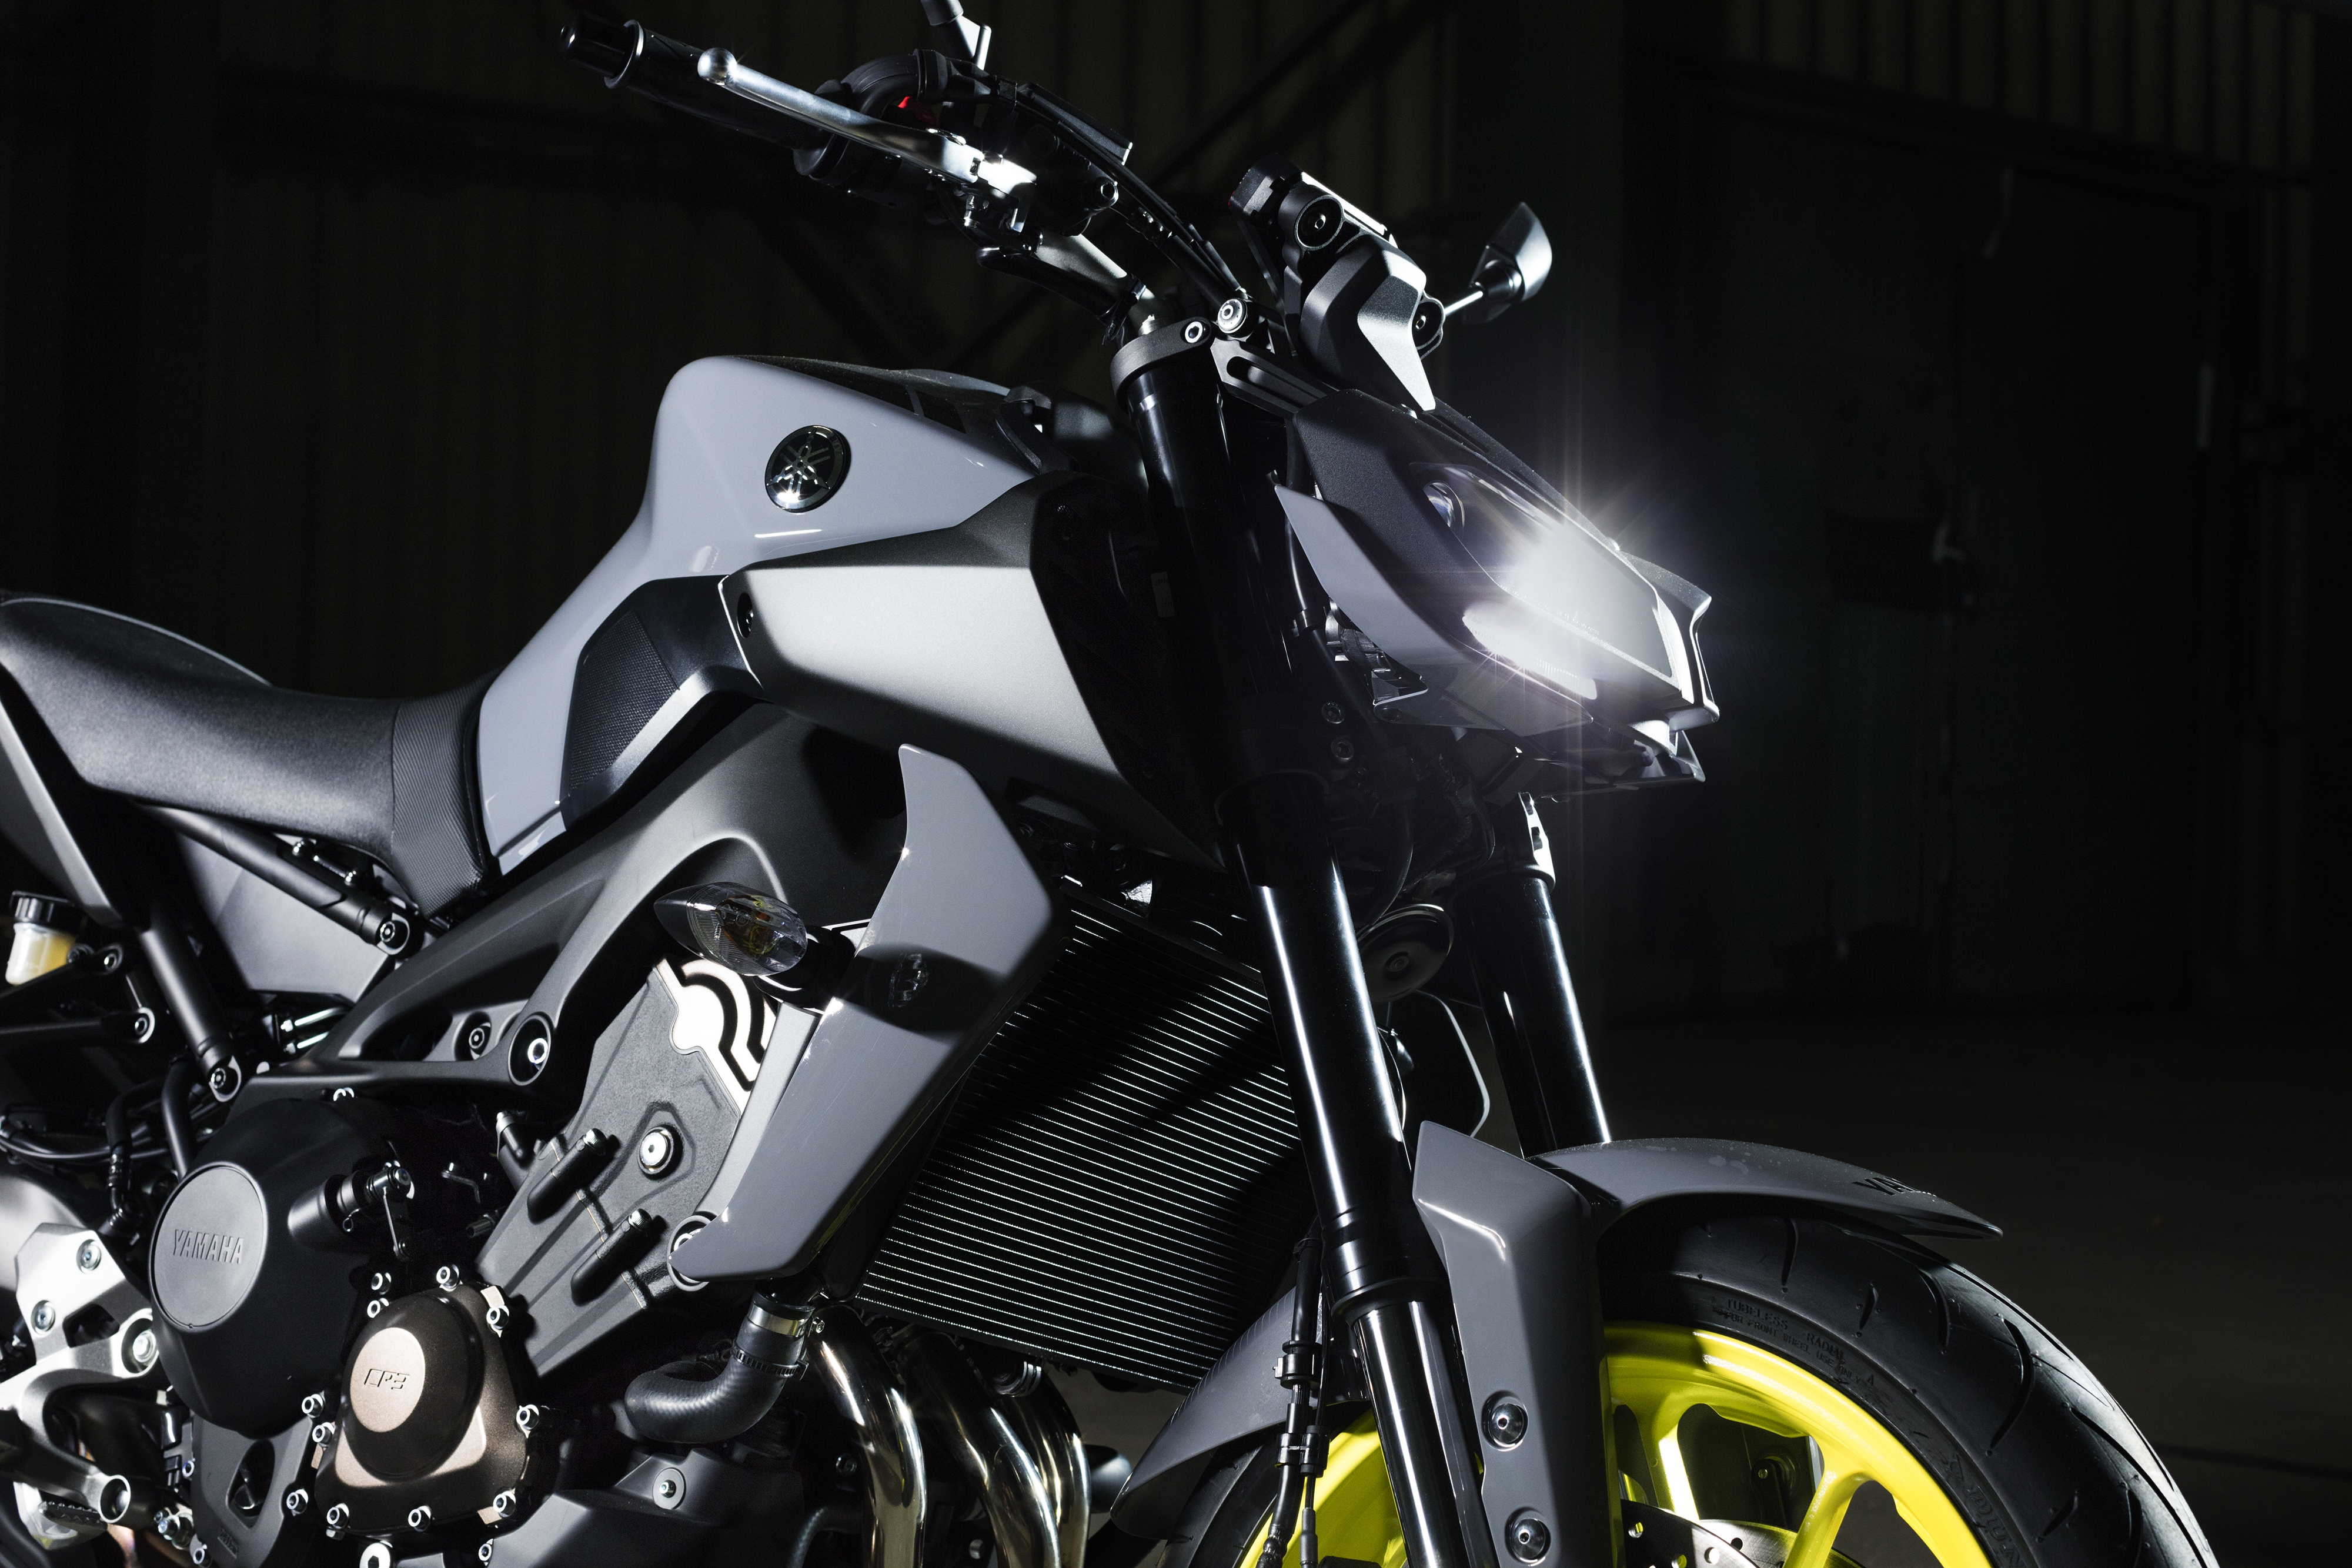 2017 Yamaha MT-09 updated for the new year - now with LED lights ...